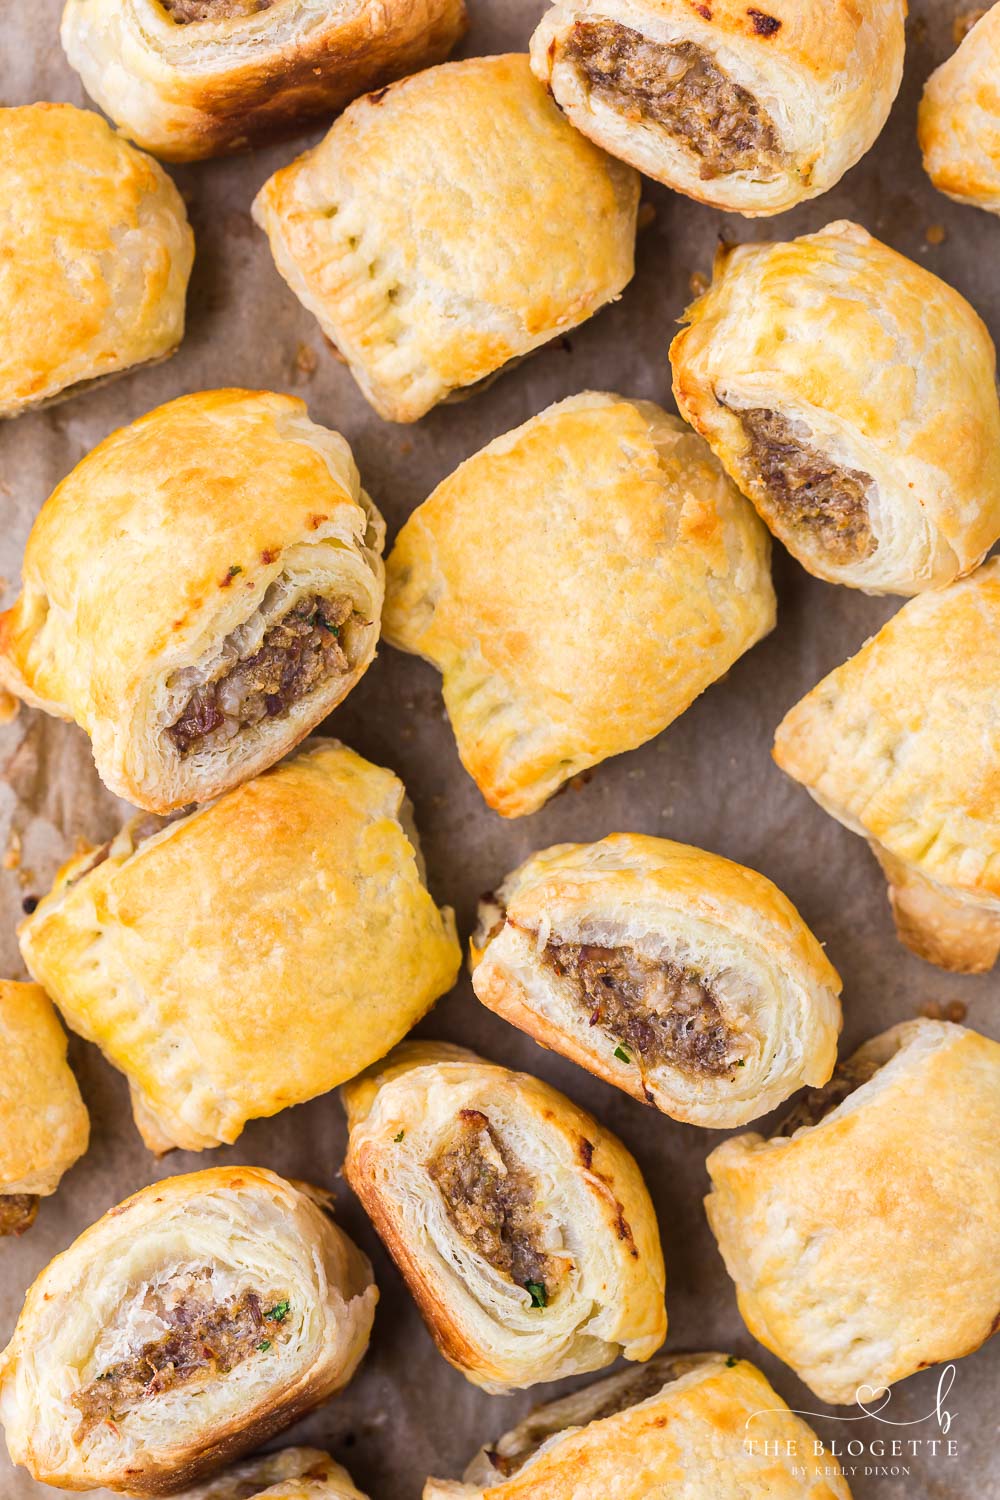 Appetizer sausage rolls feature a meaty mixture stuffed inside buttery soft puff pastry. An easy crowd-pleasing handheld party appetizer!